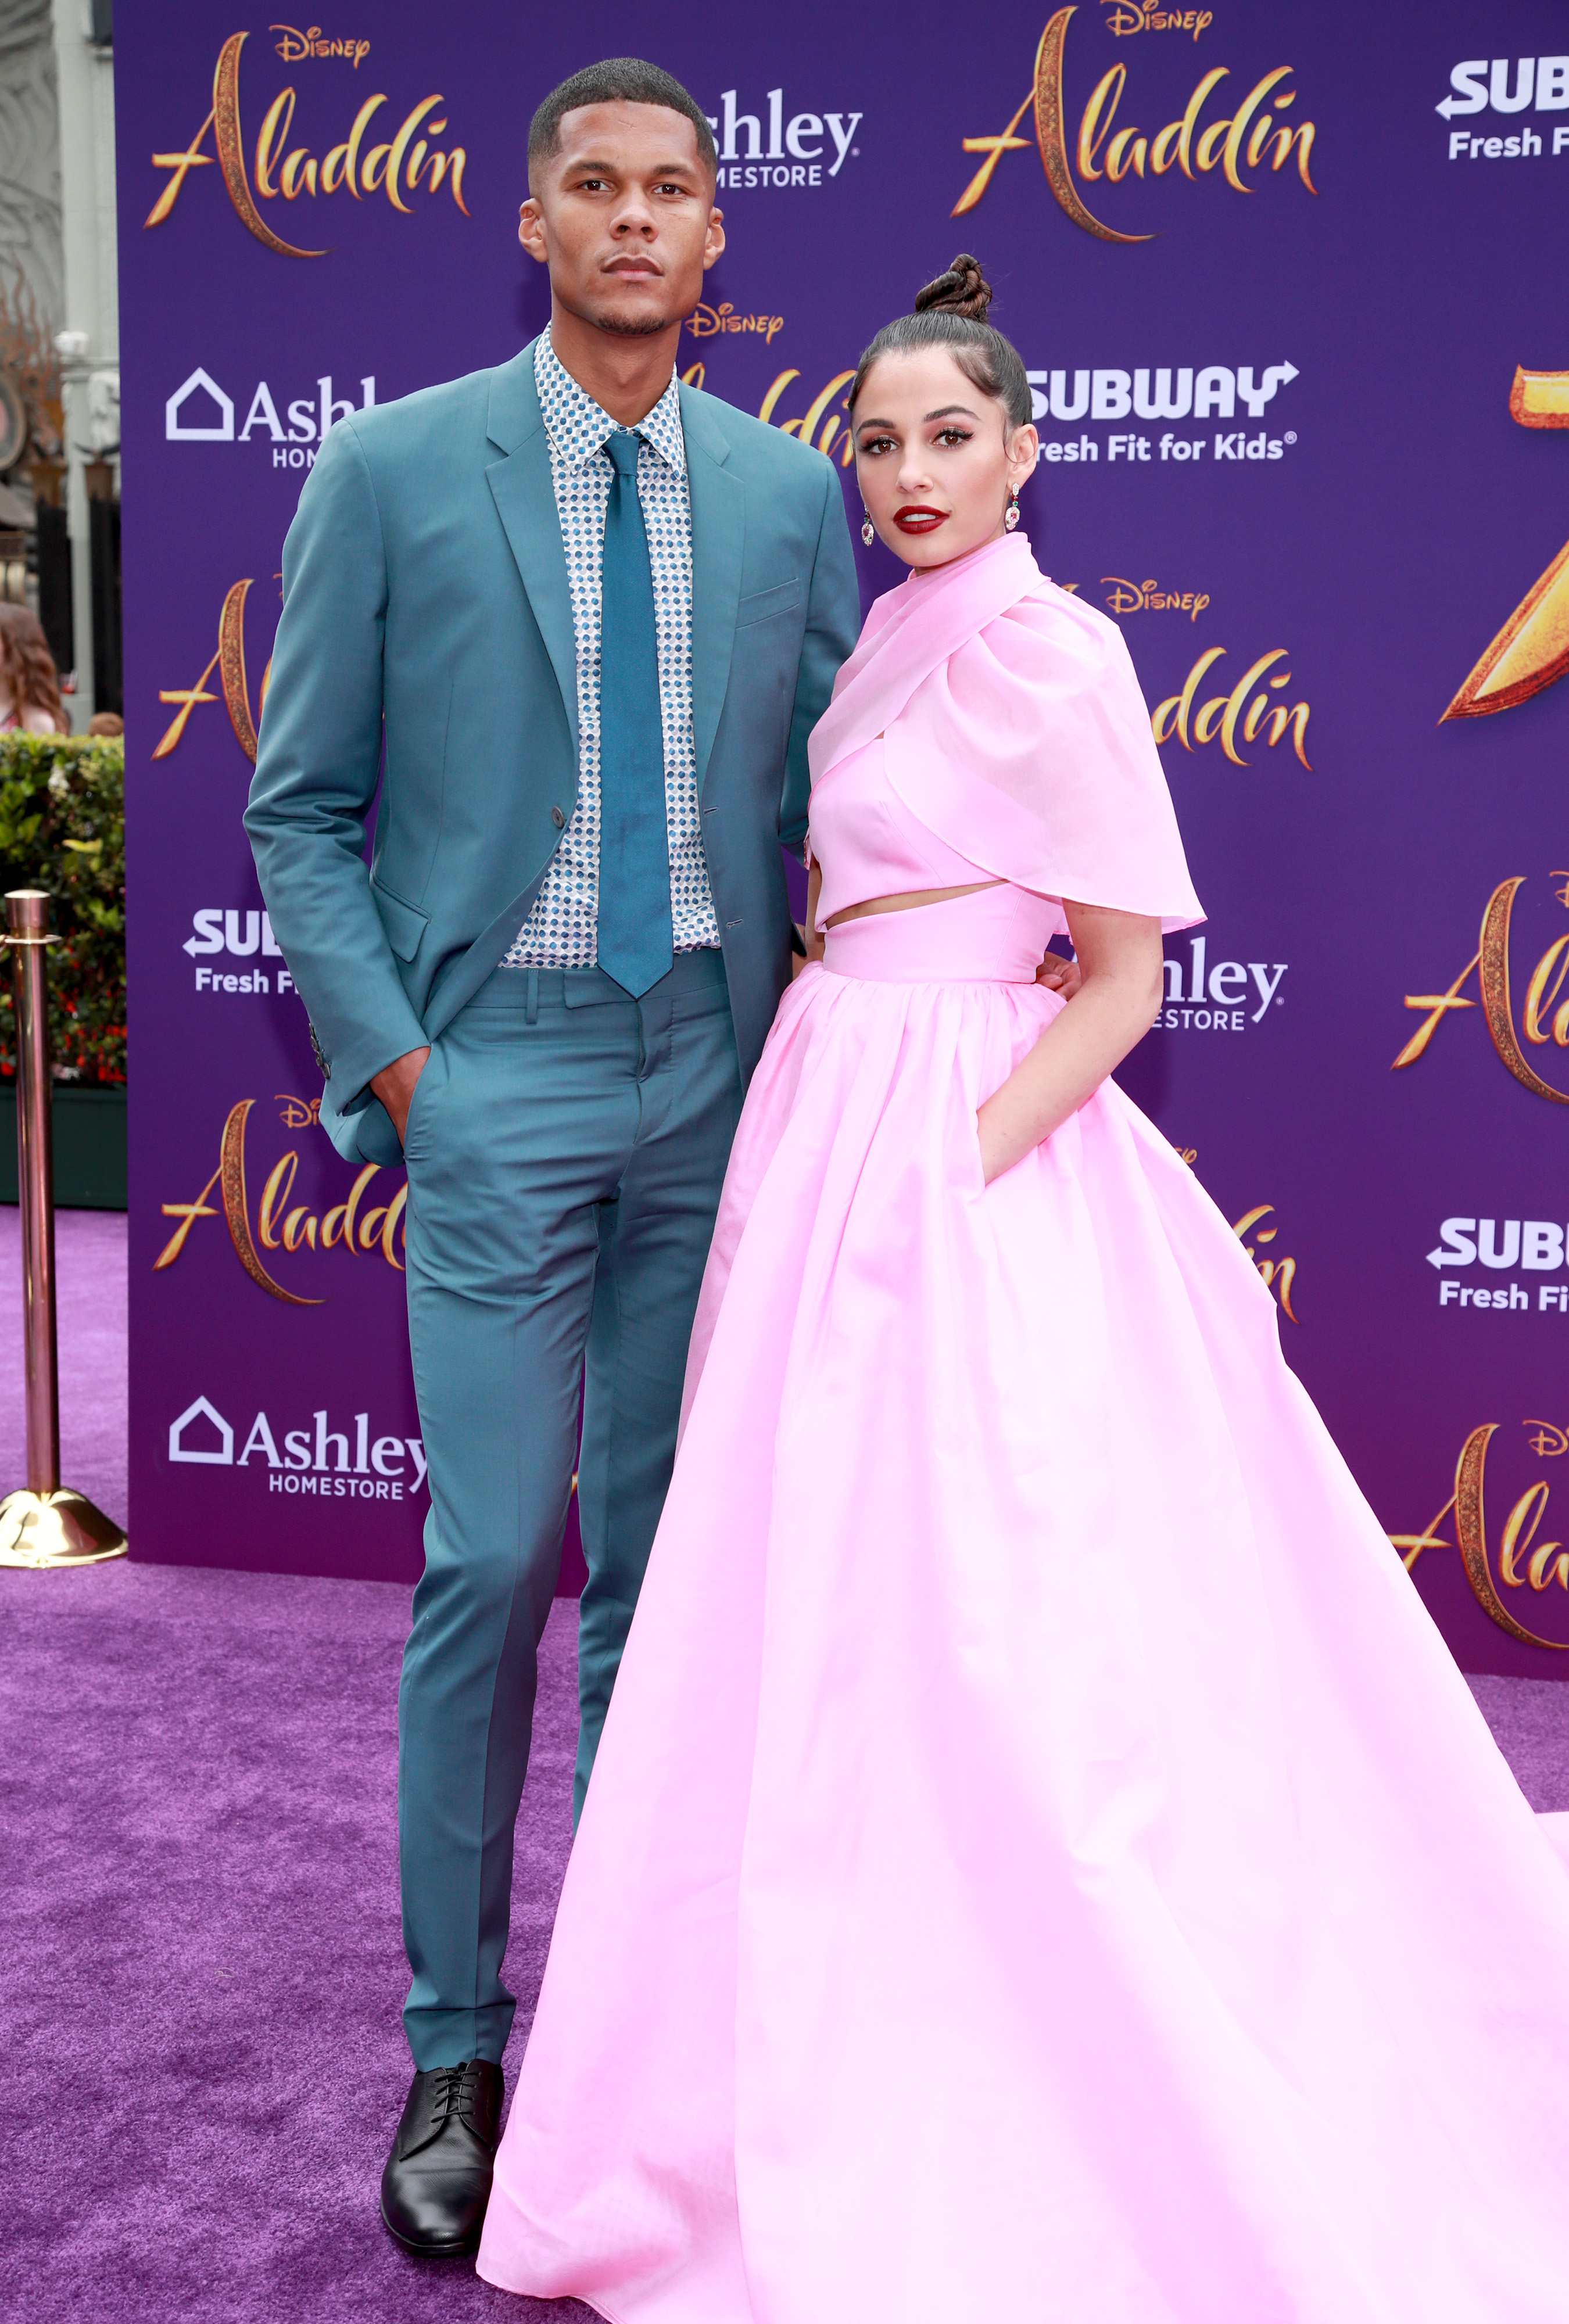 Jordan Spence and Naomi Scott pose at the premiere of Disney's "Aladdin" on May 21, 2019, in Los Angeles, California | Source: Getty Images